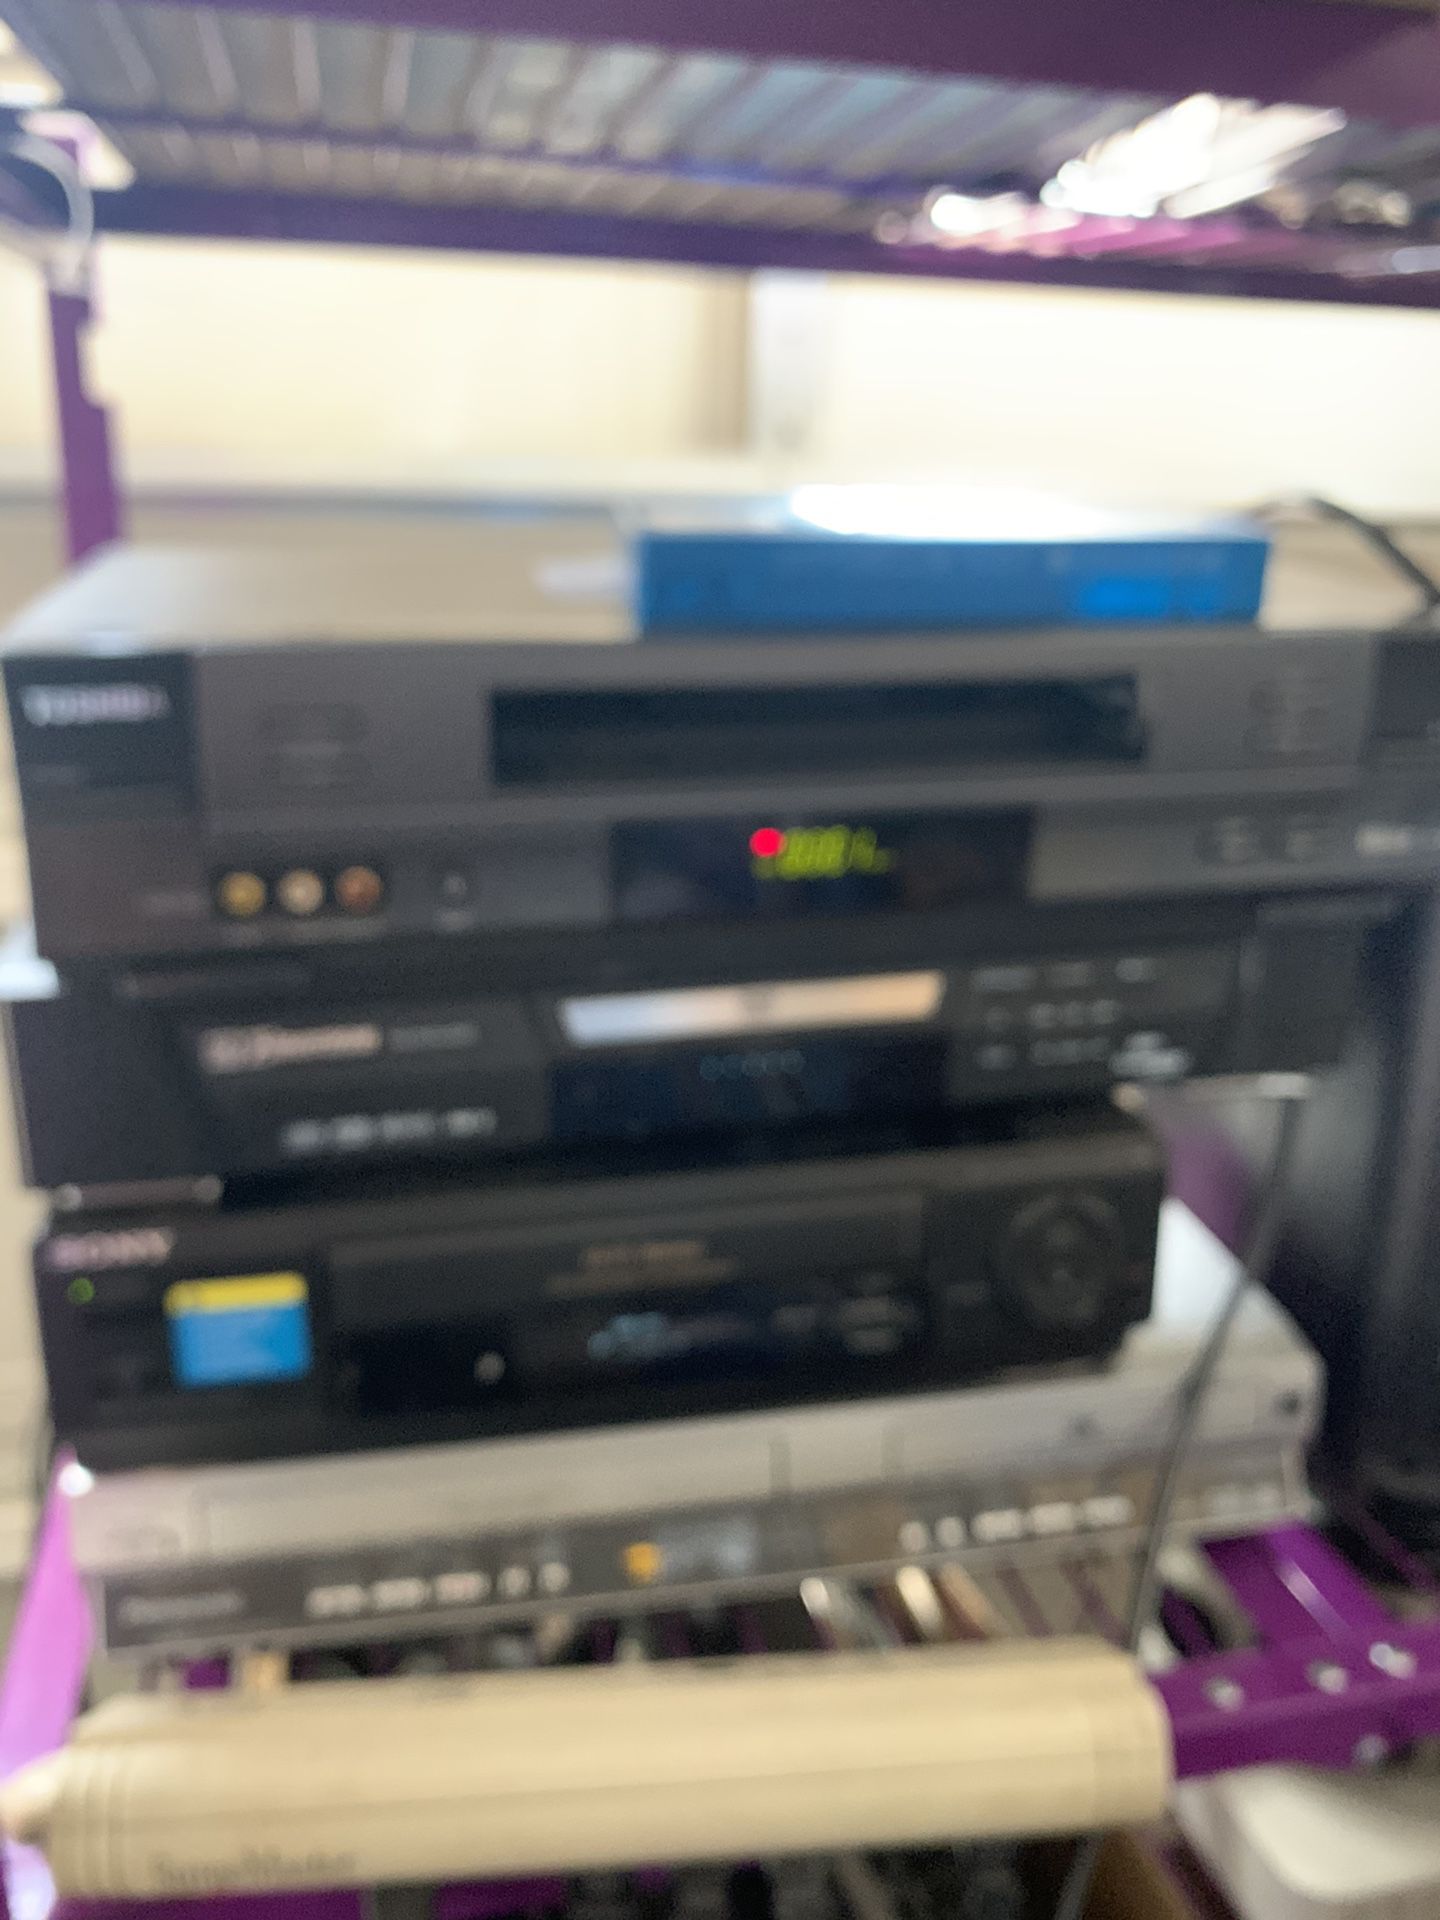 VHS,Dvd and combo players